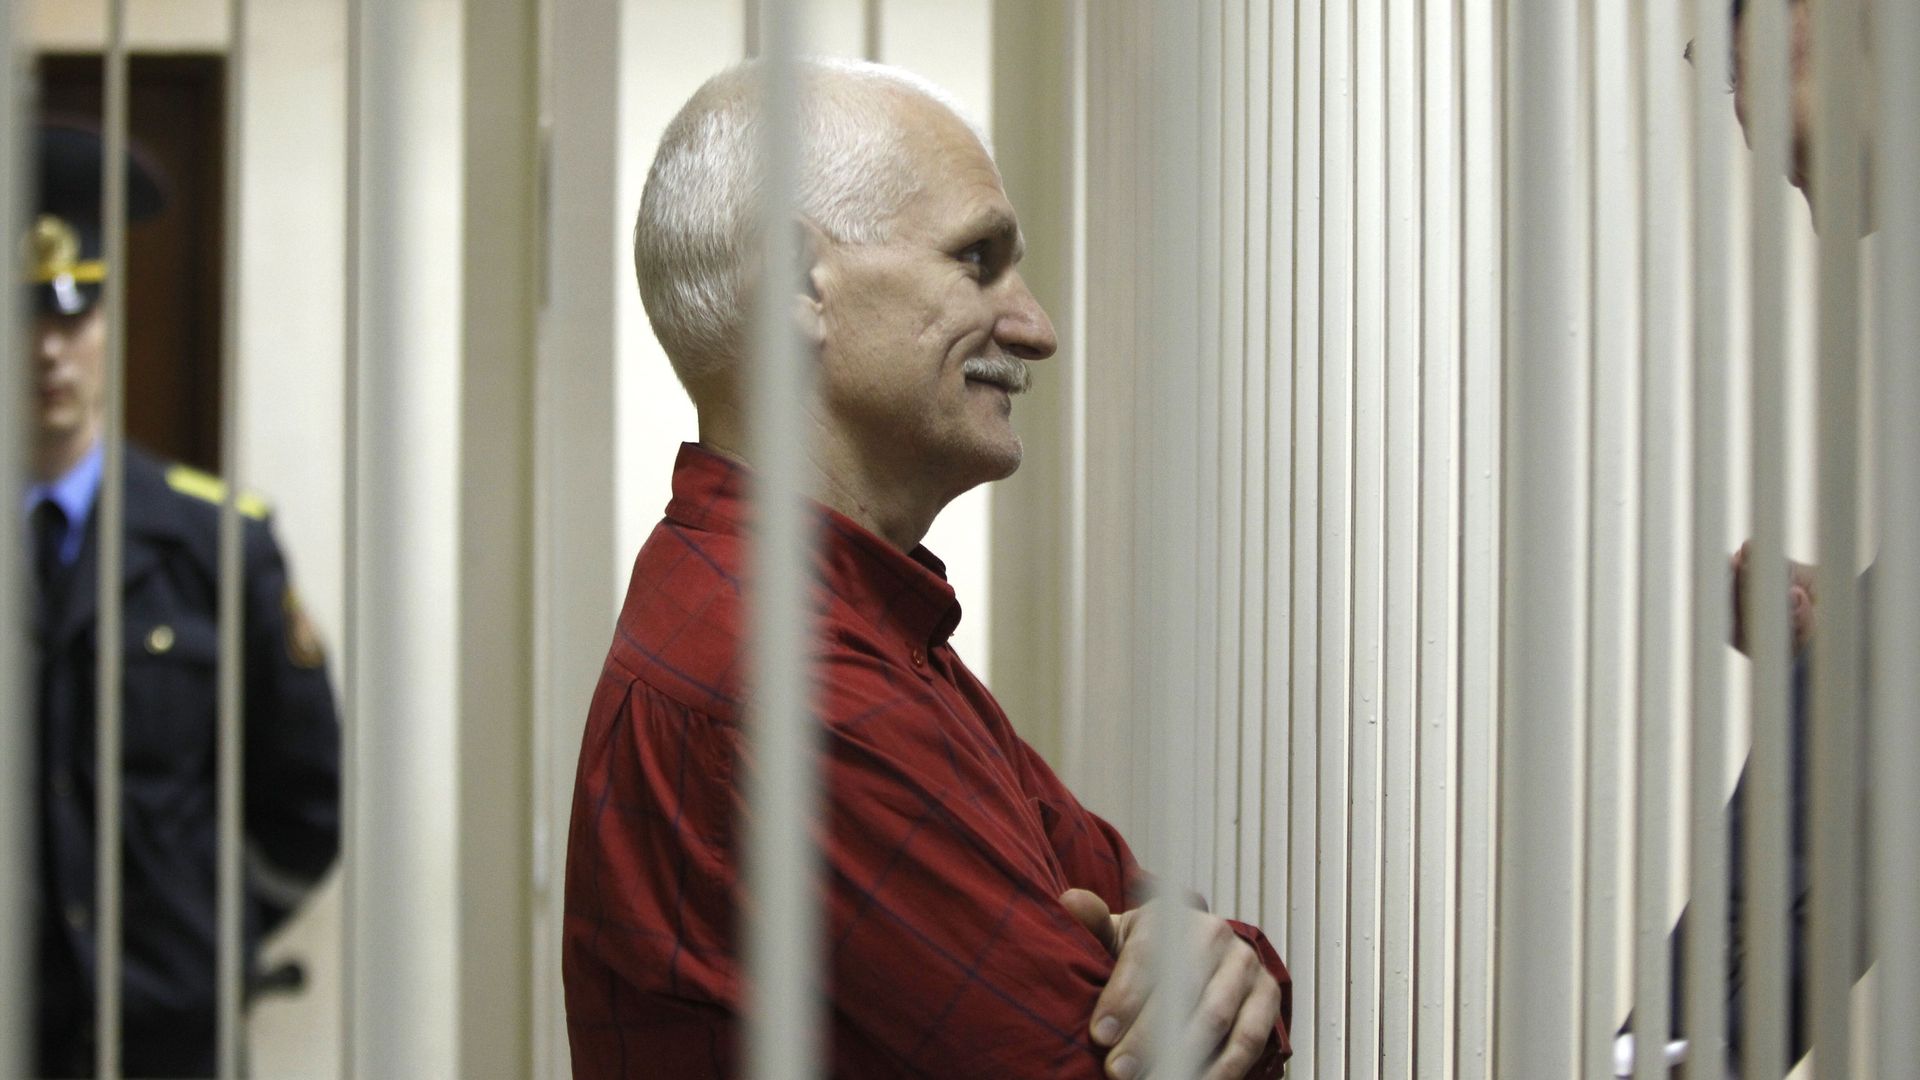 Ales Bialiatski in a cage during a court session in Minsk, Belarus, in 2011.